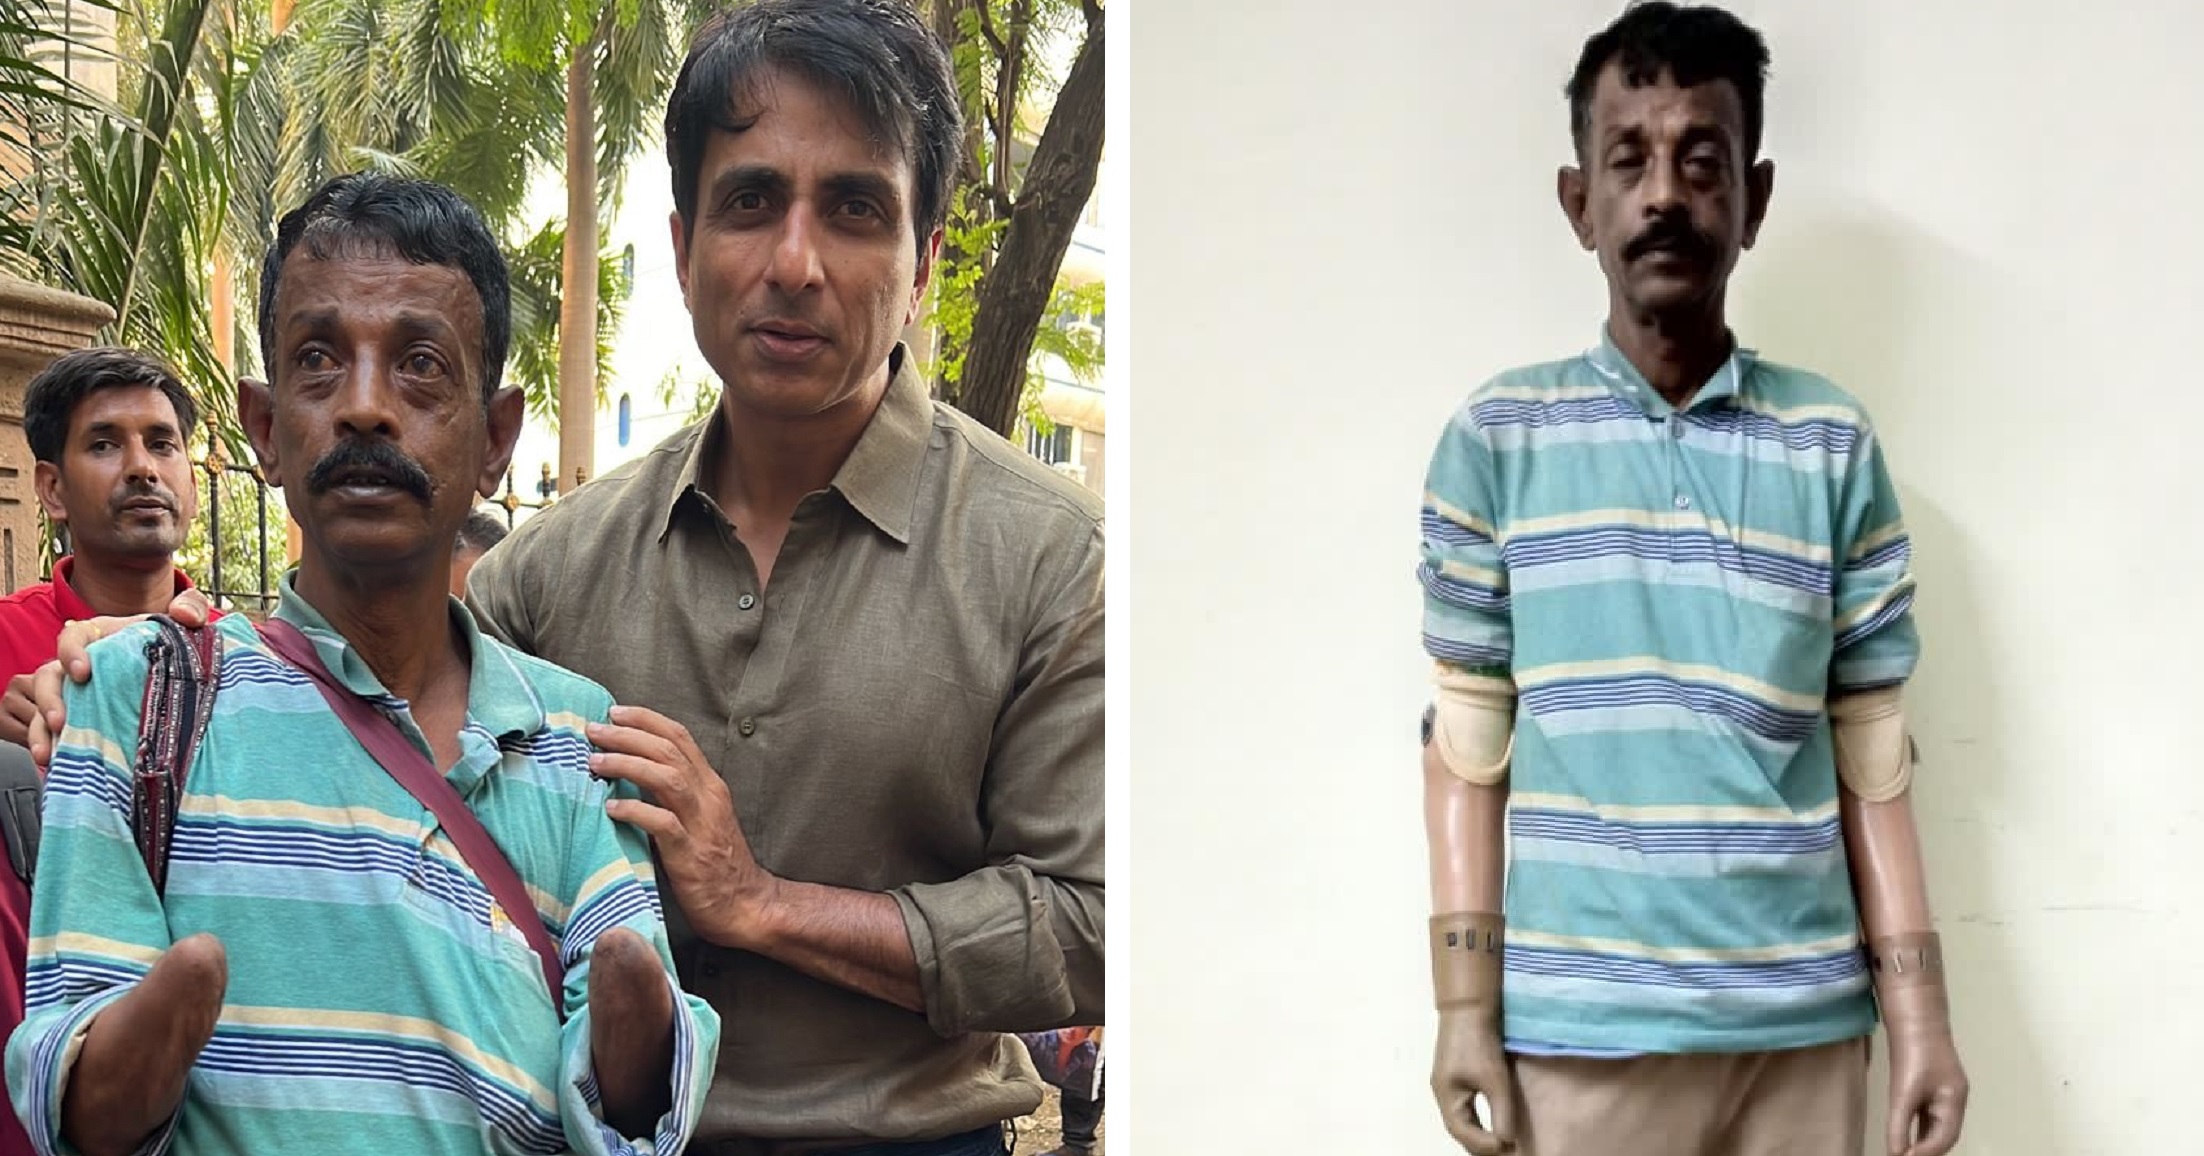 Sonu Sood Helps Man With Amputated Hands, Gives New Lease Of Life With Prosthetic Hands